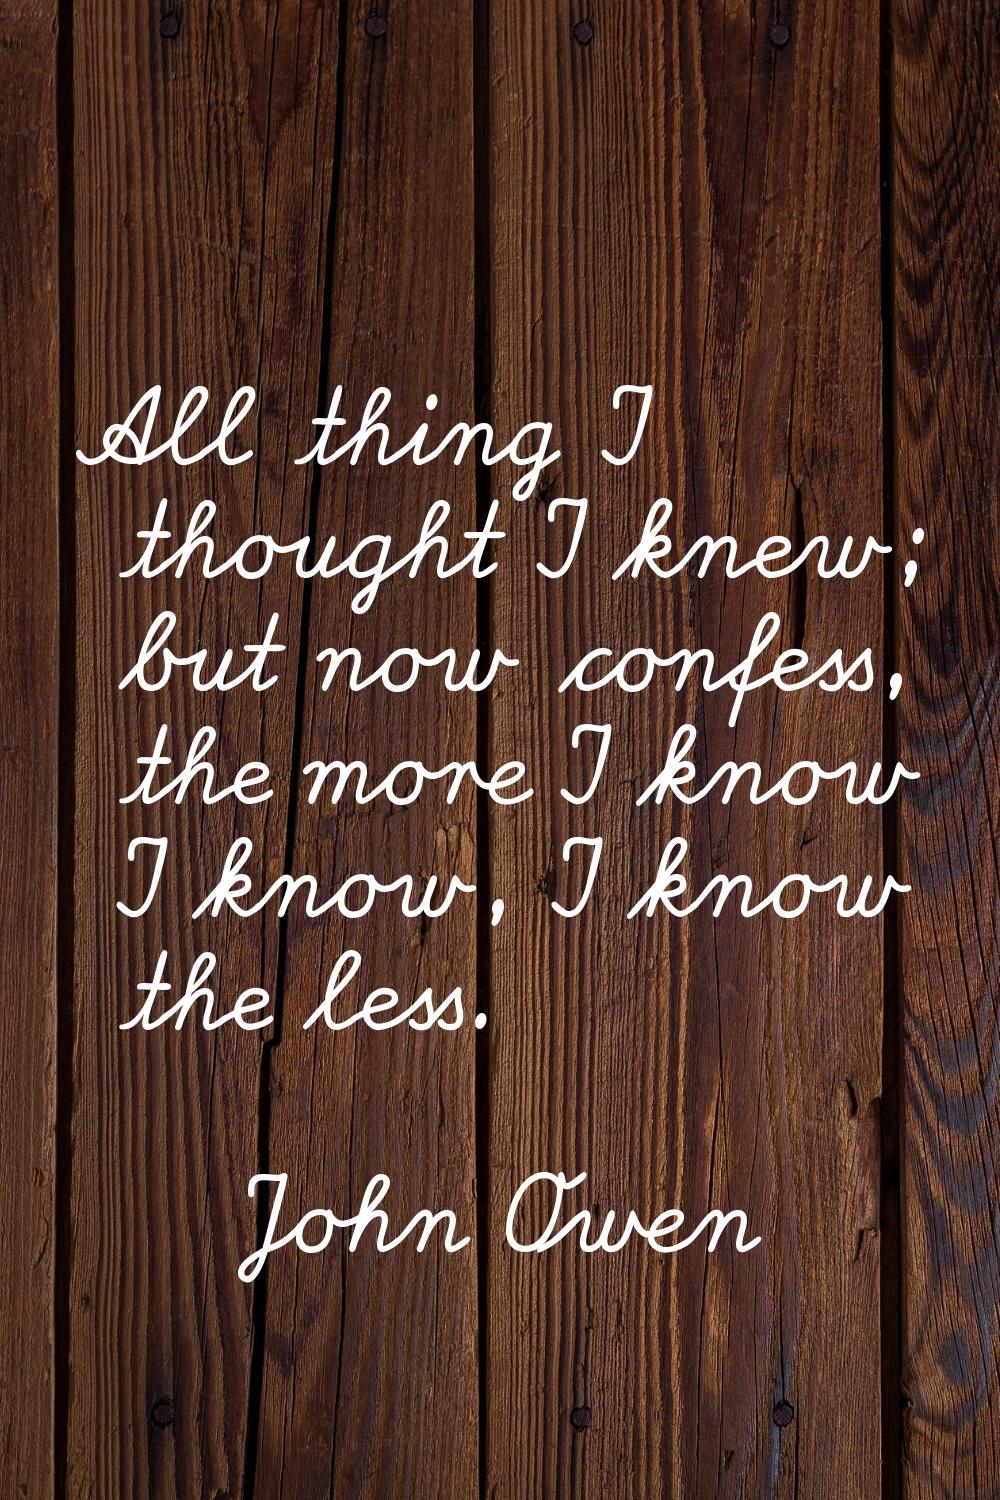 All thing I thought I knew; but now confess, the more I know I know, I know the less.